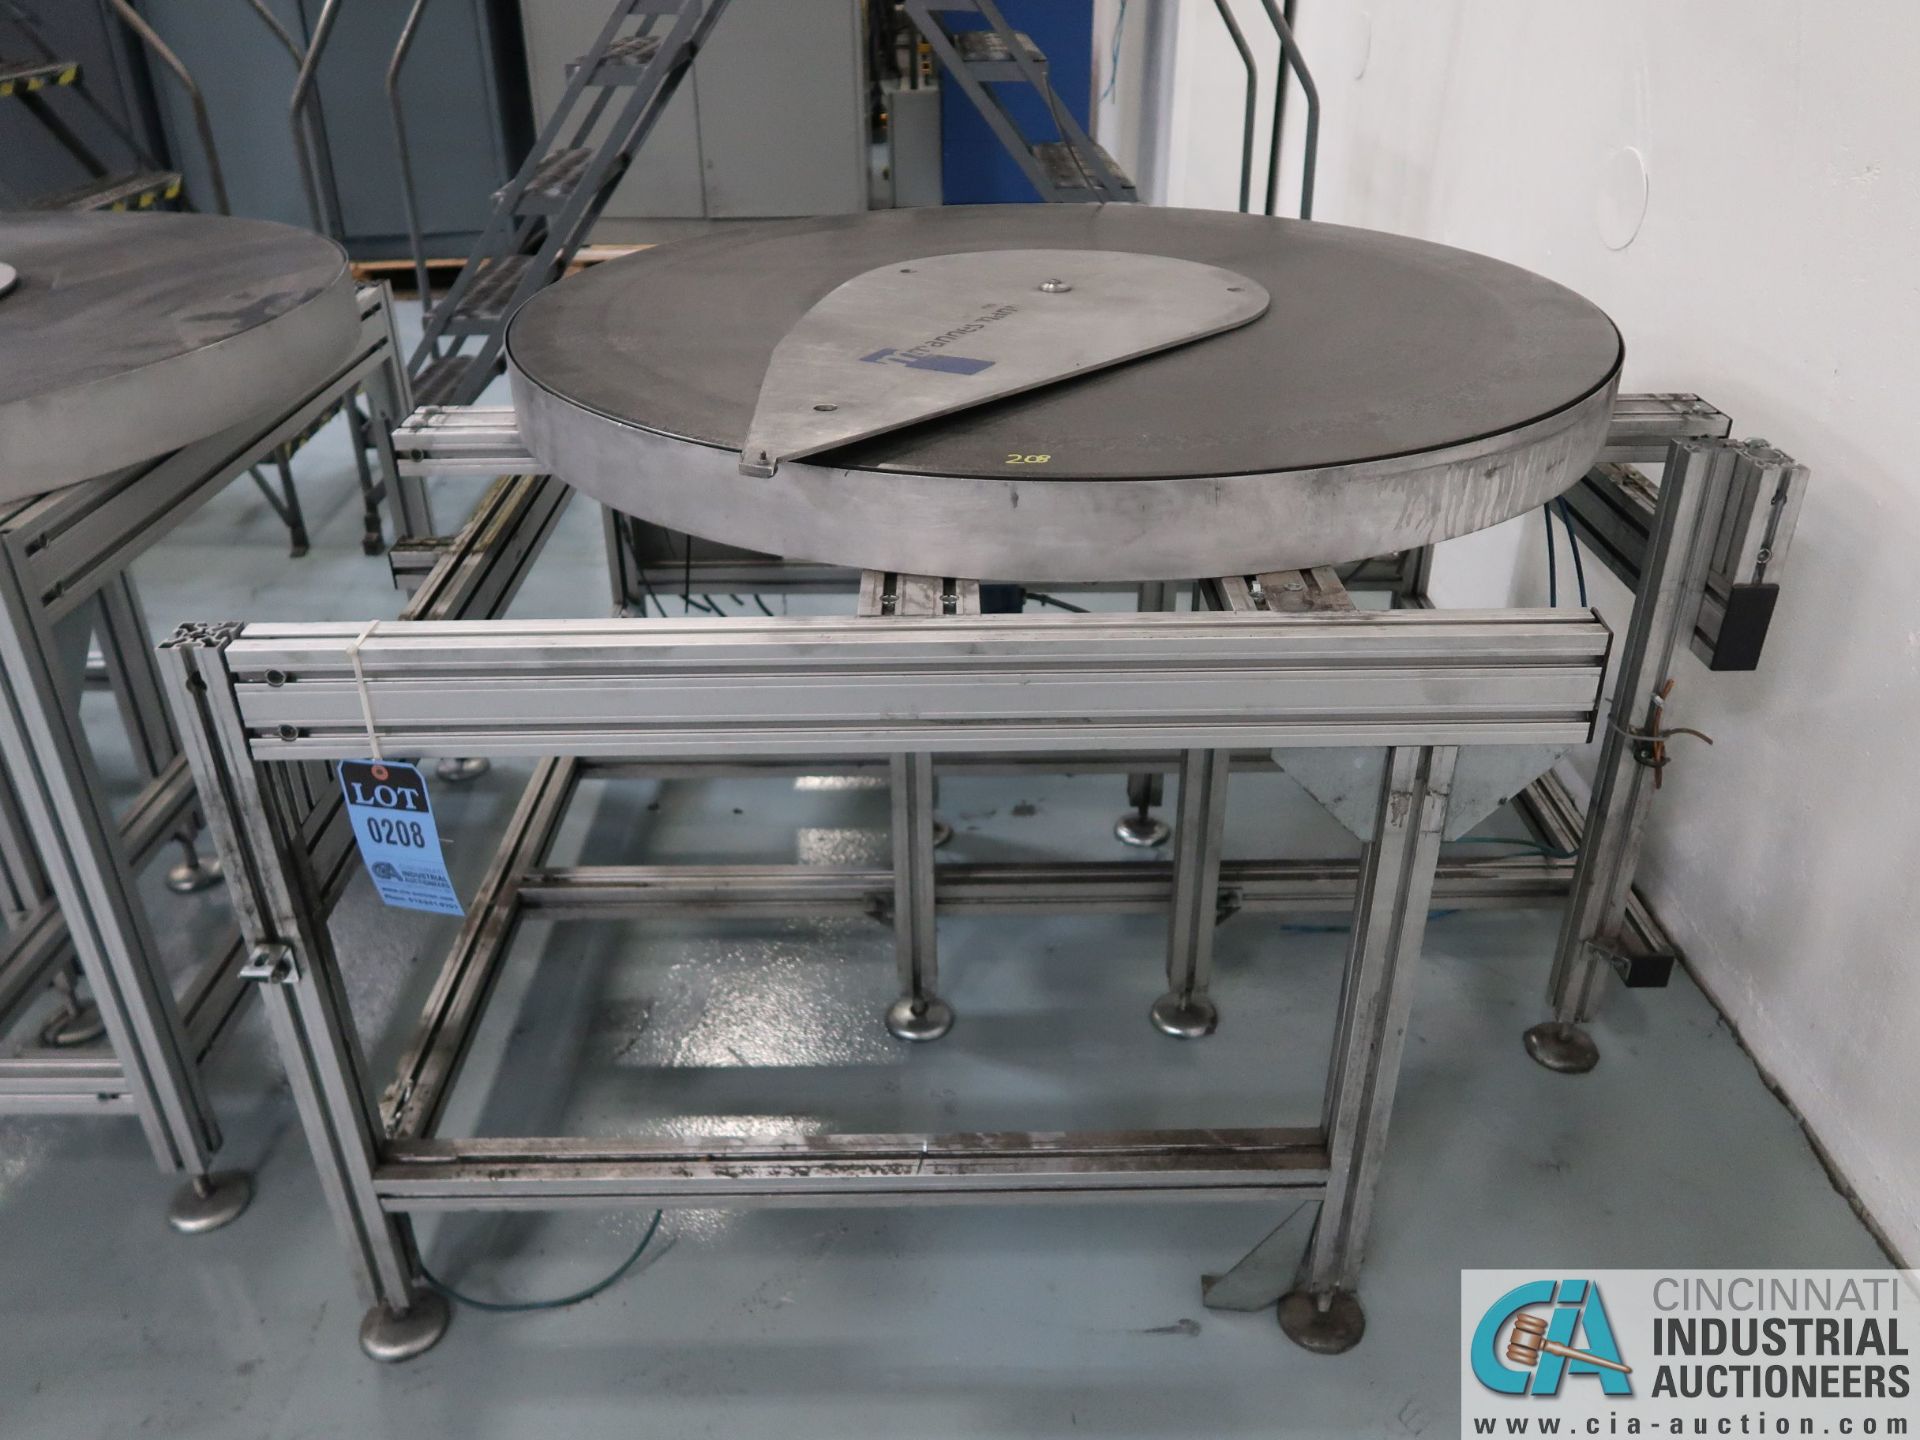 50" DIA. STEEL TURNTABLE WITH ALUMINUM FRAME *$25.00 RIGGING FEE DUE TO INDUSTRIAL SERVICES AND SA